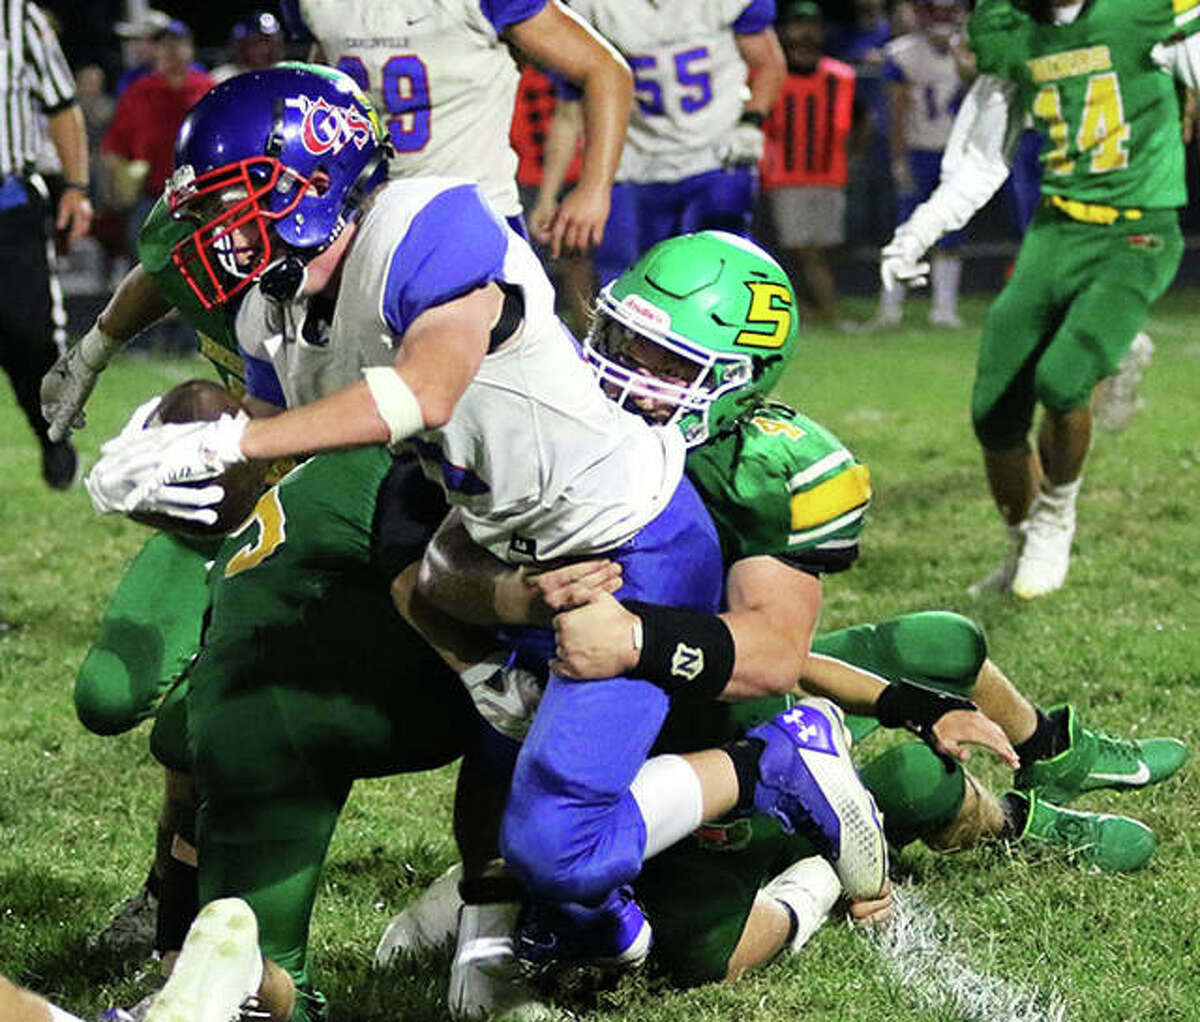 Carlinville’s Jake Schwartz is tackled by Southwestern’s Blake Funk in a South Central Conference football game Friday night at Knapp Field in Piasa.